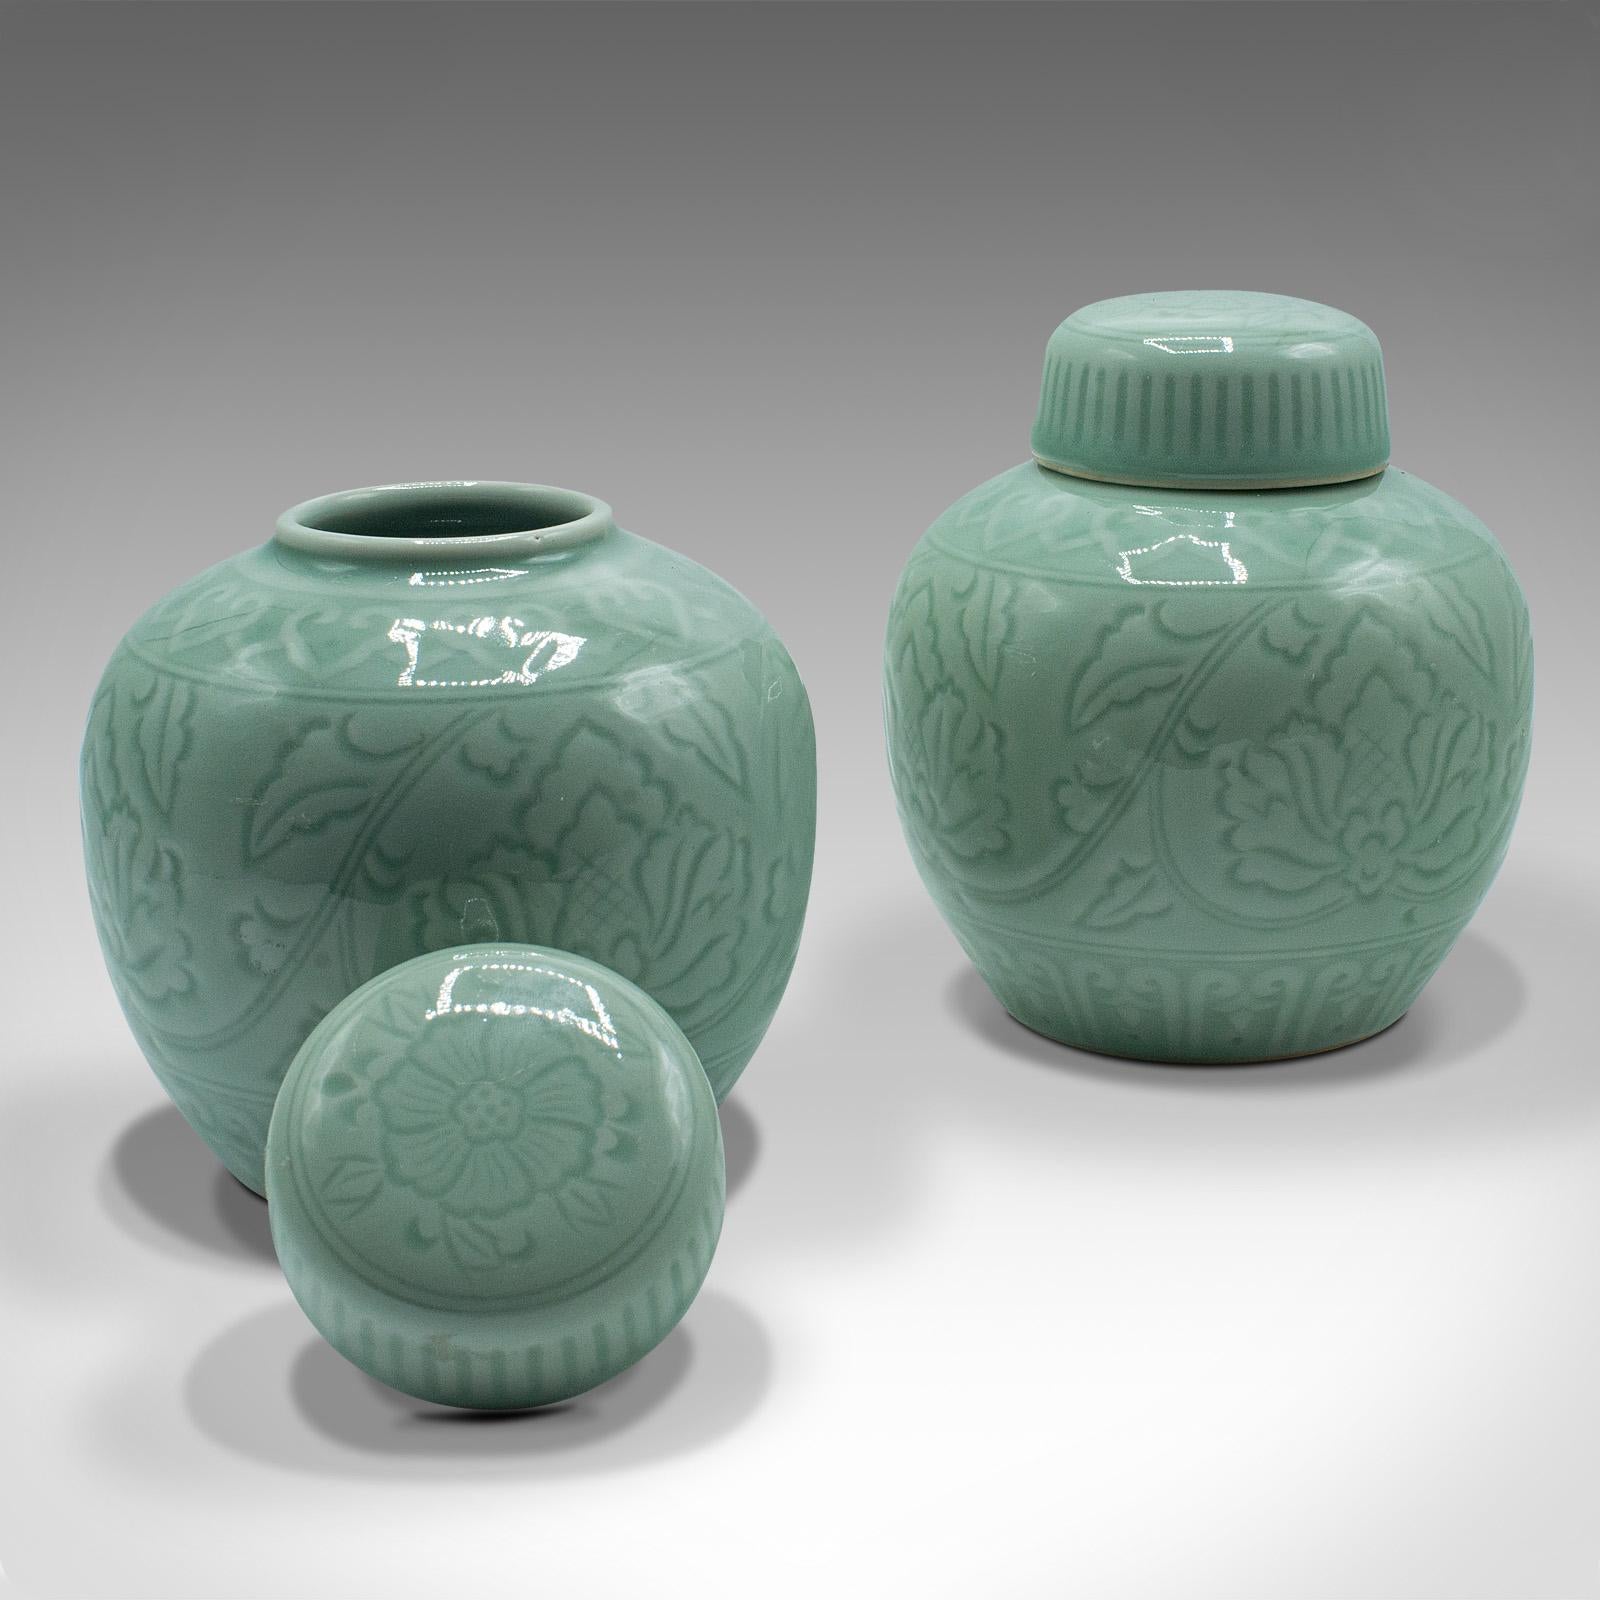 This is a pair of antique decorative spice jars. A Chinese, celadon ceramic pot, dating to the late Victorian period circa 1900.

Delightful form with wonderful celadon green hues
Displays a desirable aged patina and in very good order
Glazed